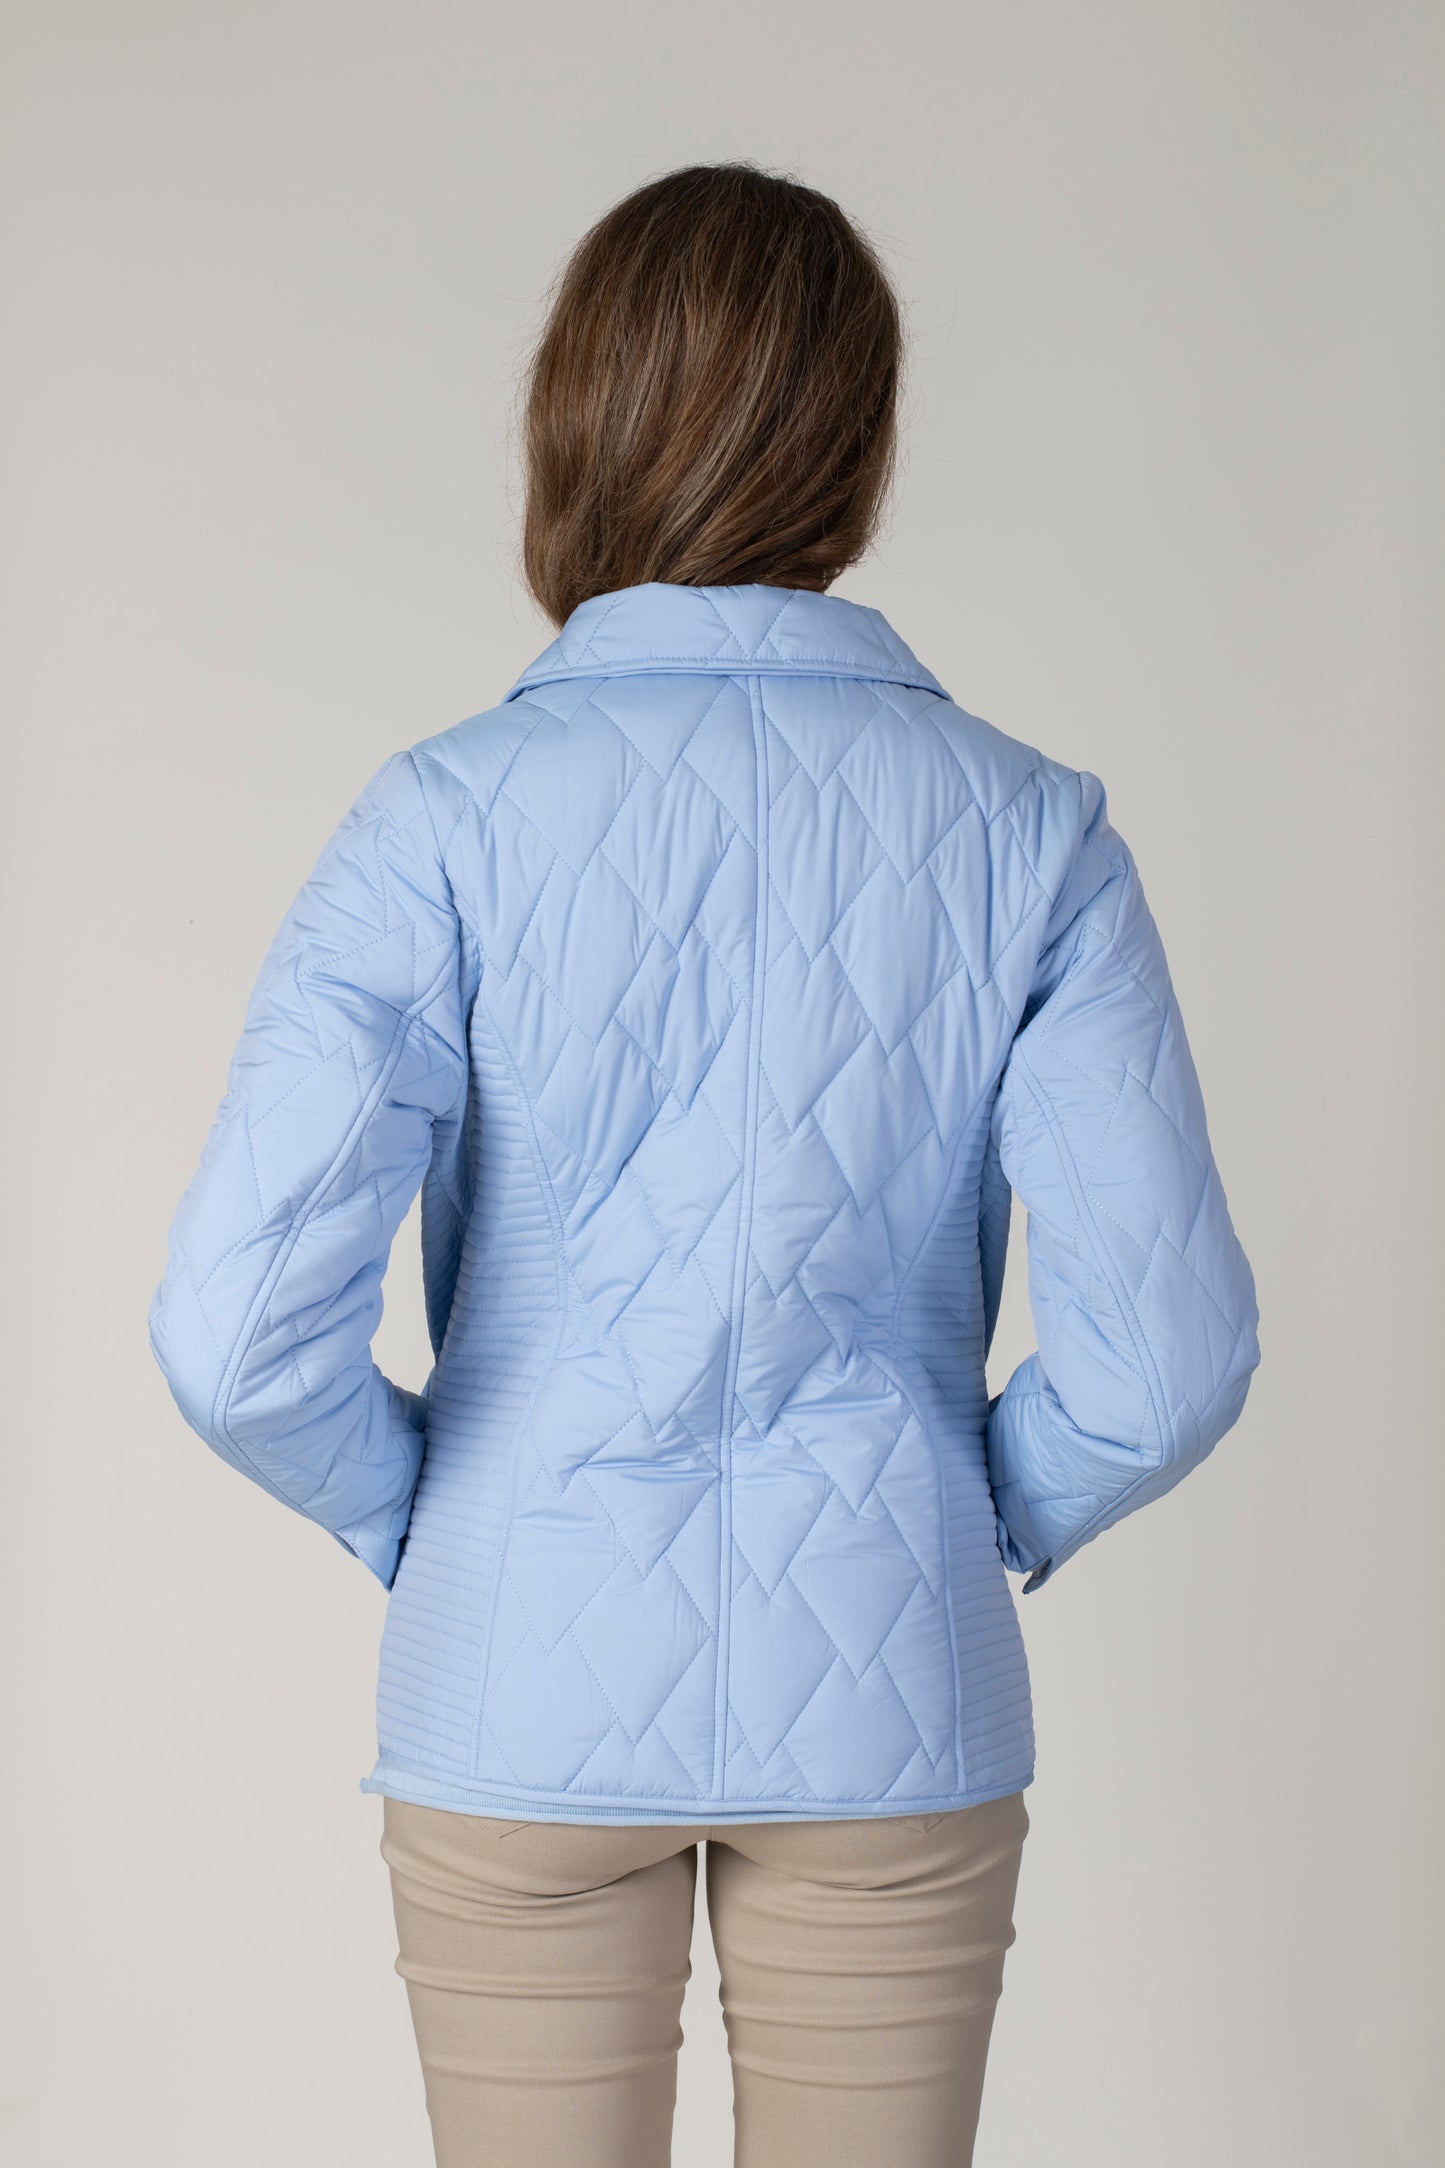 Jessica Graaf - Plain Quilted Jacket - 27014